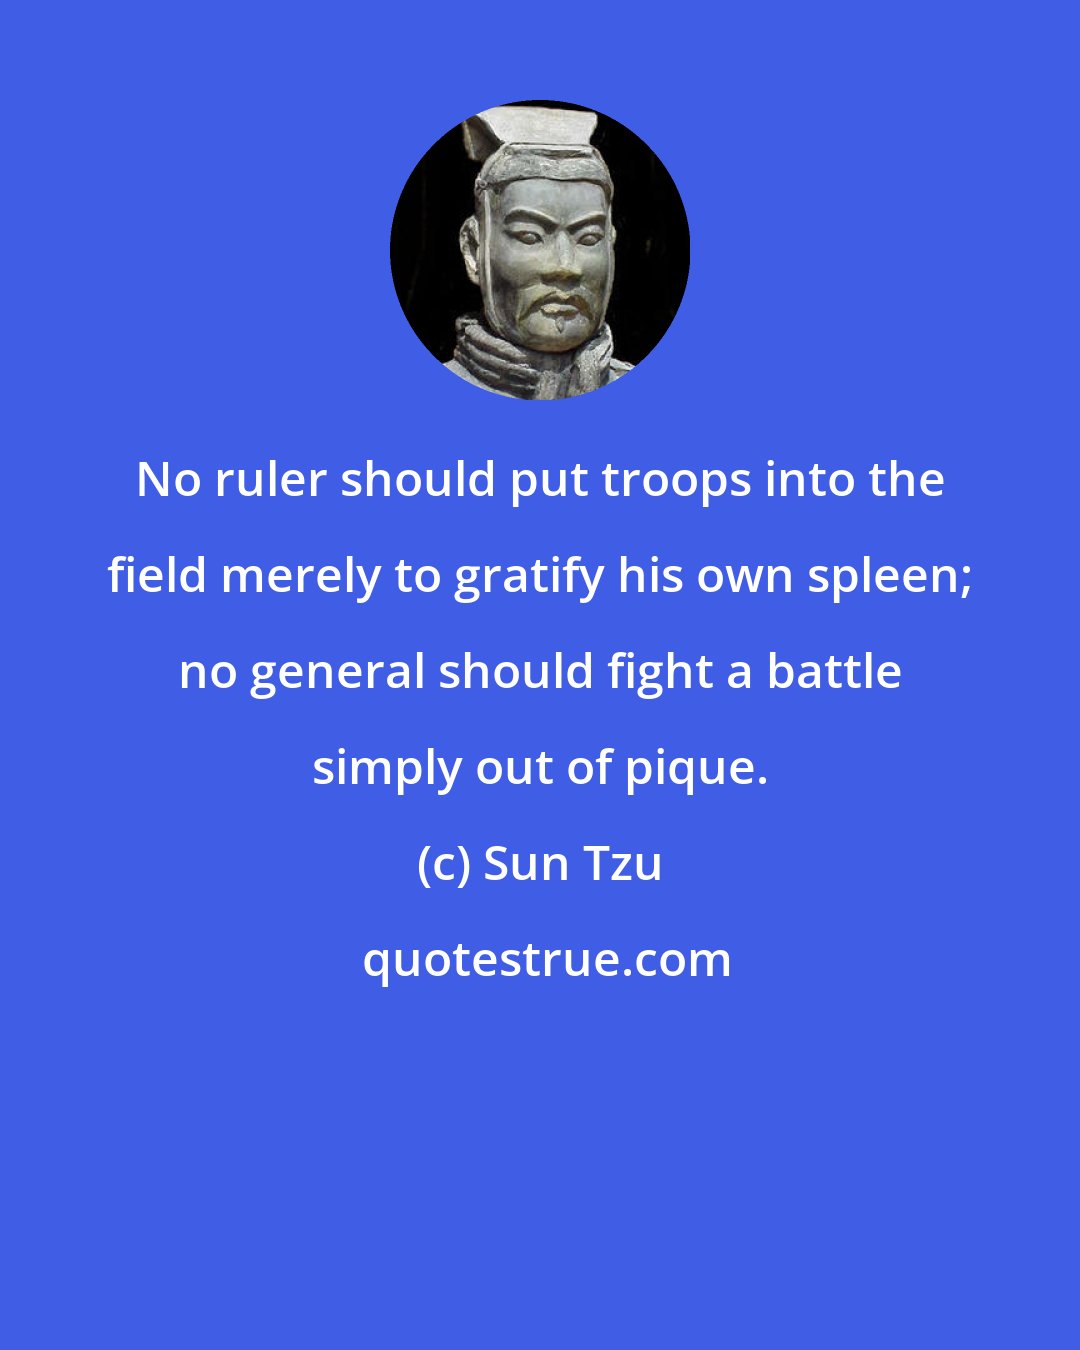 Sun Tzu: No ruler should put troops into the field merely to gratify his own spleen; no general should fight a battle simply out of pique.